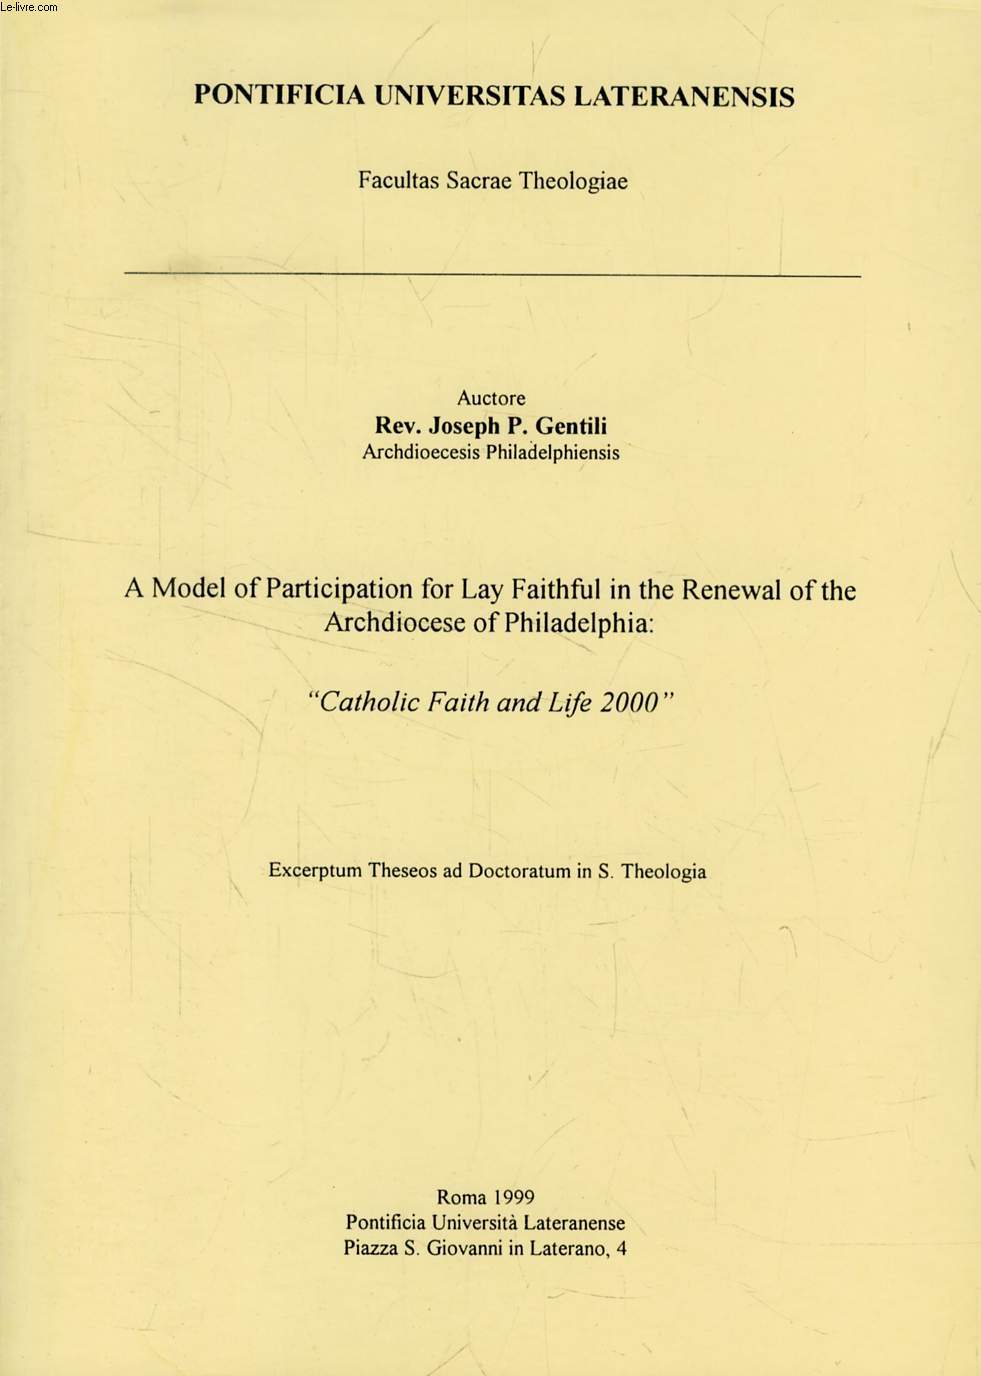 A MODEL OF PARTICIPATION FOR LAY FAITHFUL IN THE RENEWAL OF THE ARCHDIOCESE OF PHILADELPHIA: 'CATHOLIC FAITH AND LIFE 2000' (EXCERPTUM THESEOS)